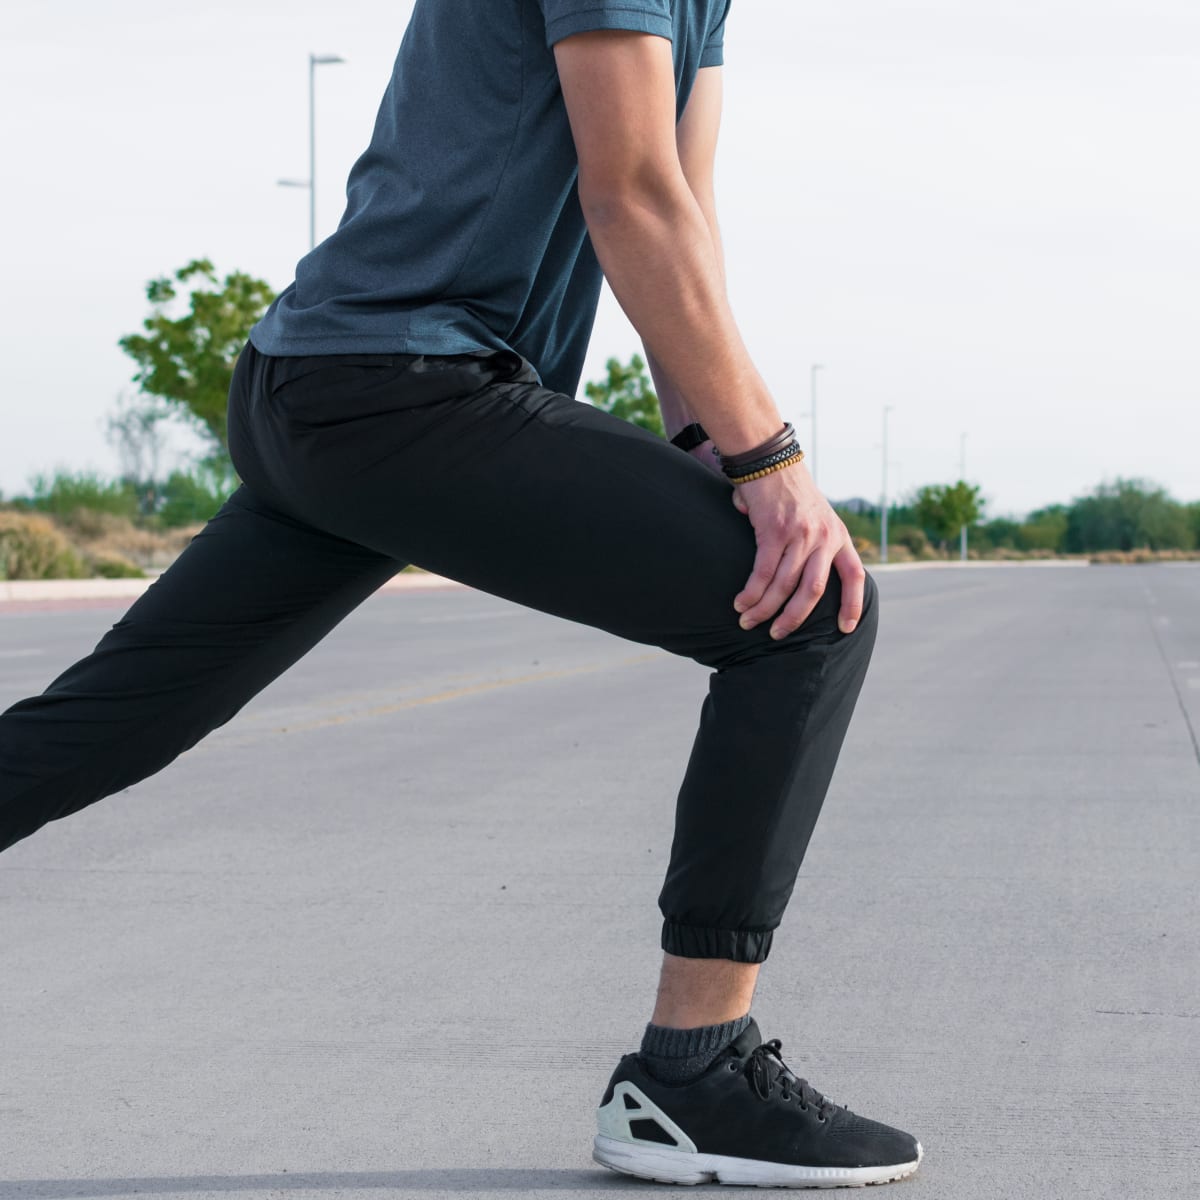 The 15 Best Workout Pants For Men | GearMoose